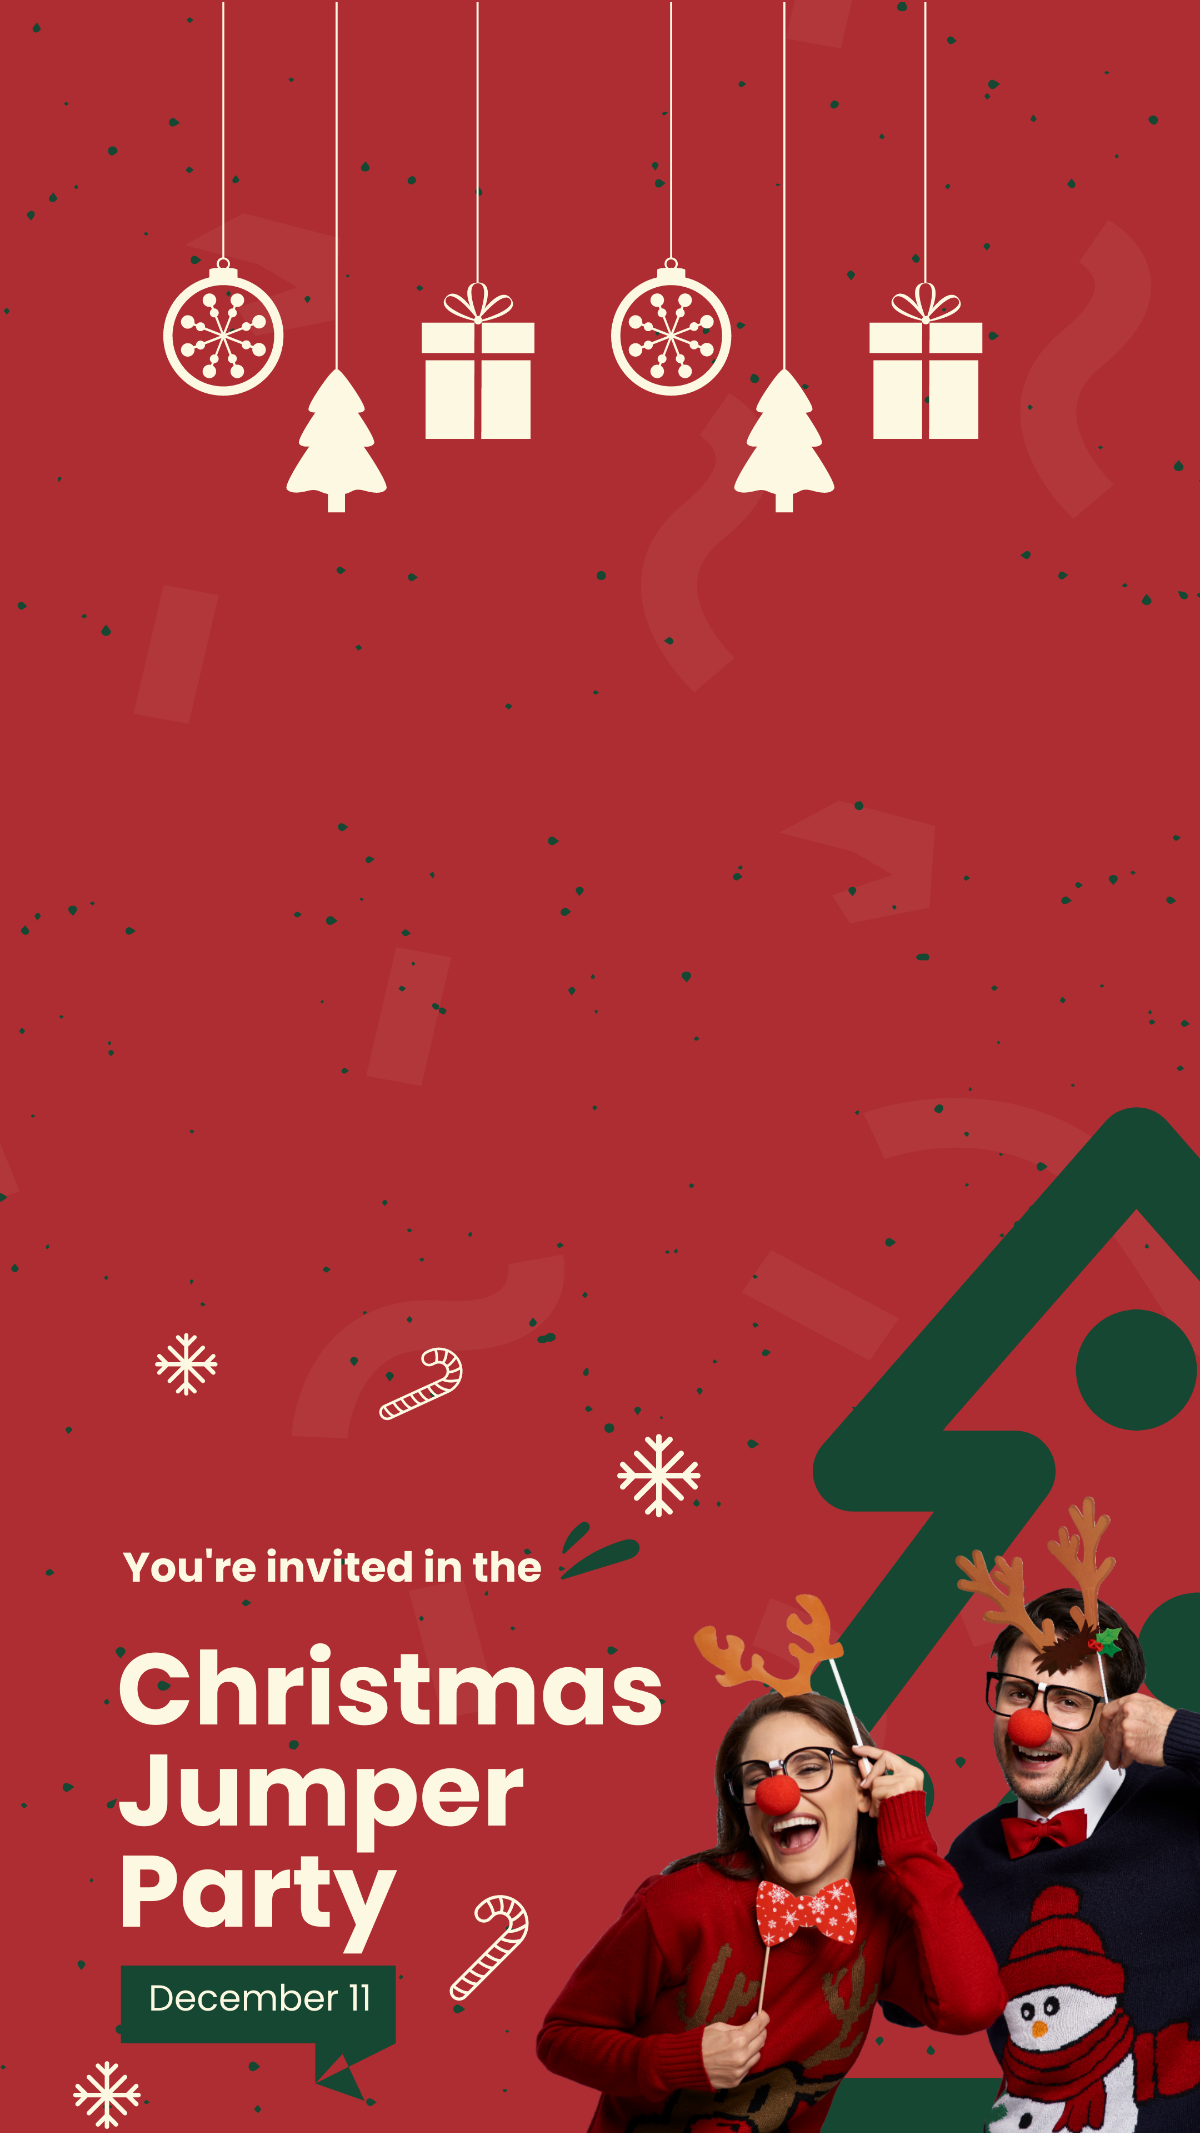 Free Christmas Jumper Party Snapchat Geofilter Template